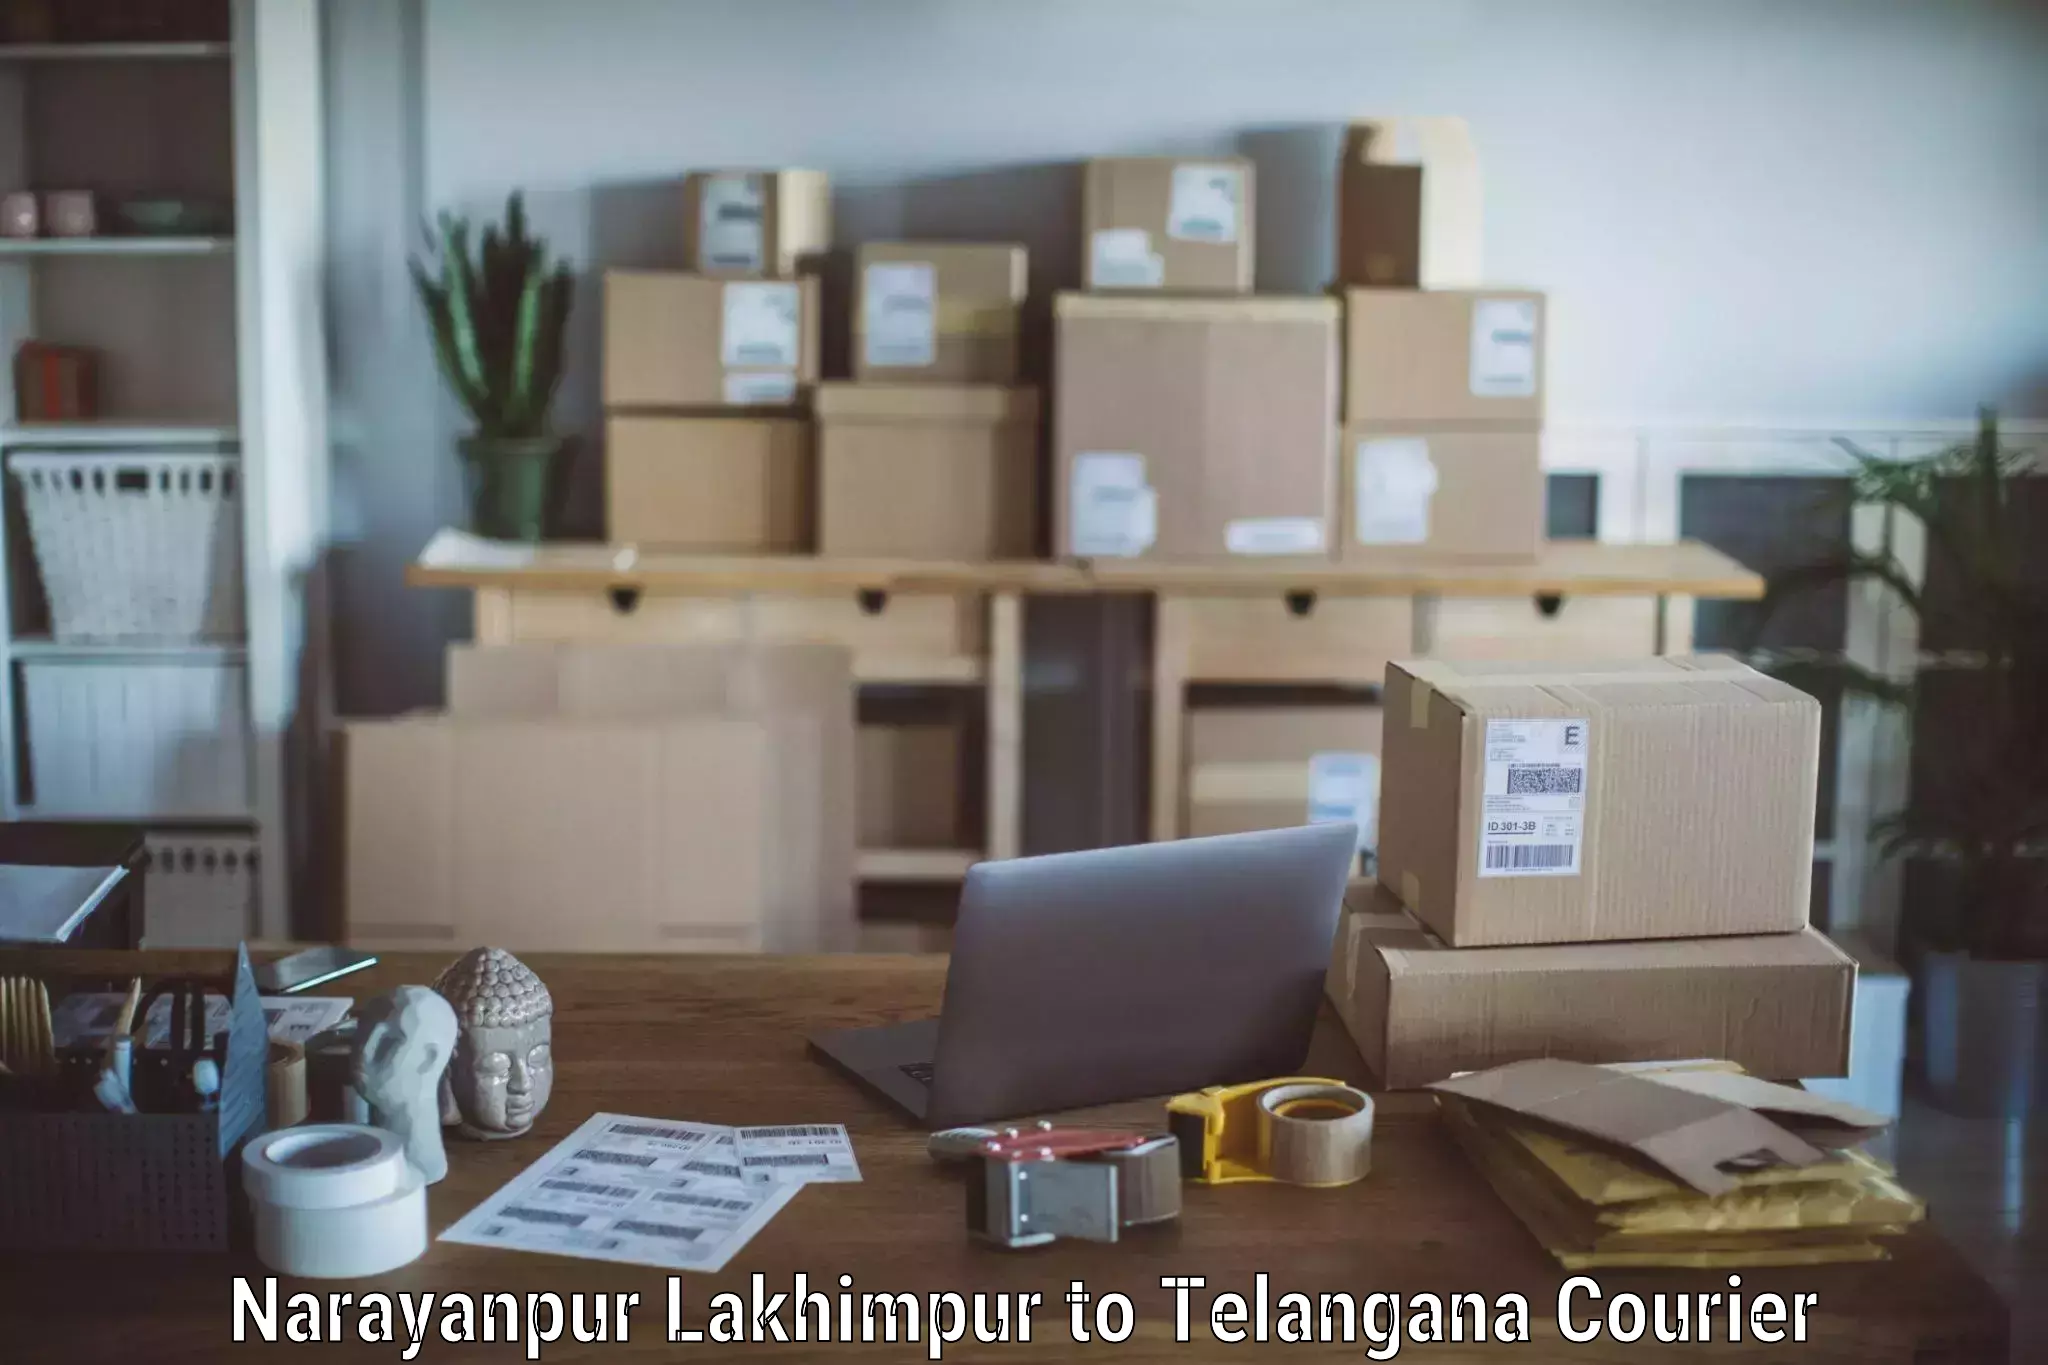 Trusted furniture movers Narayanpur Lakhimpur to Shamshabad